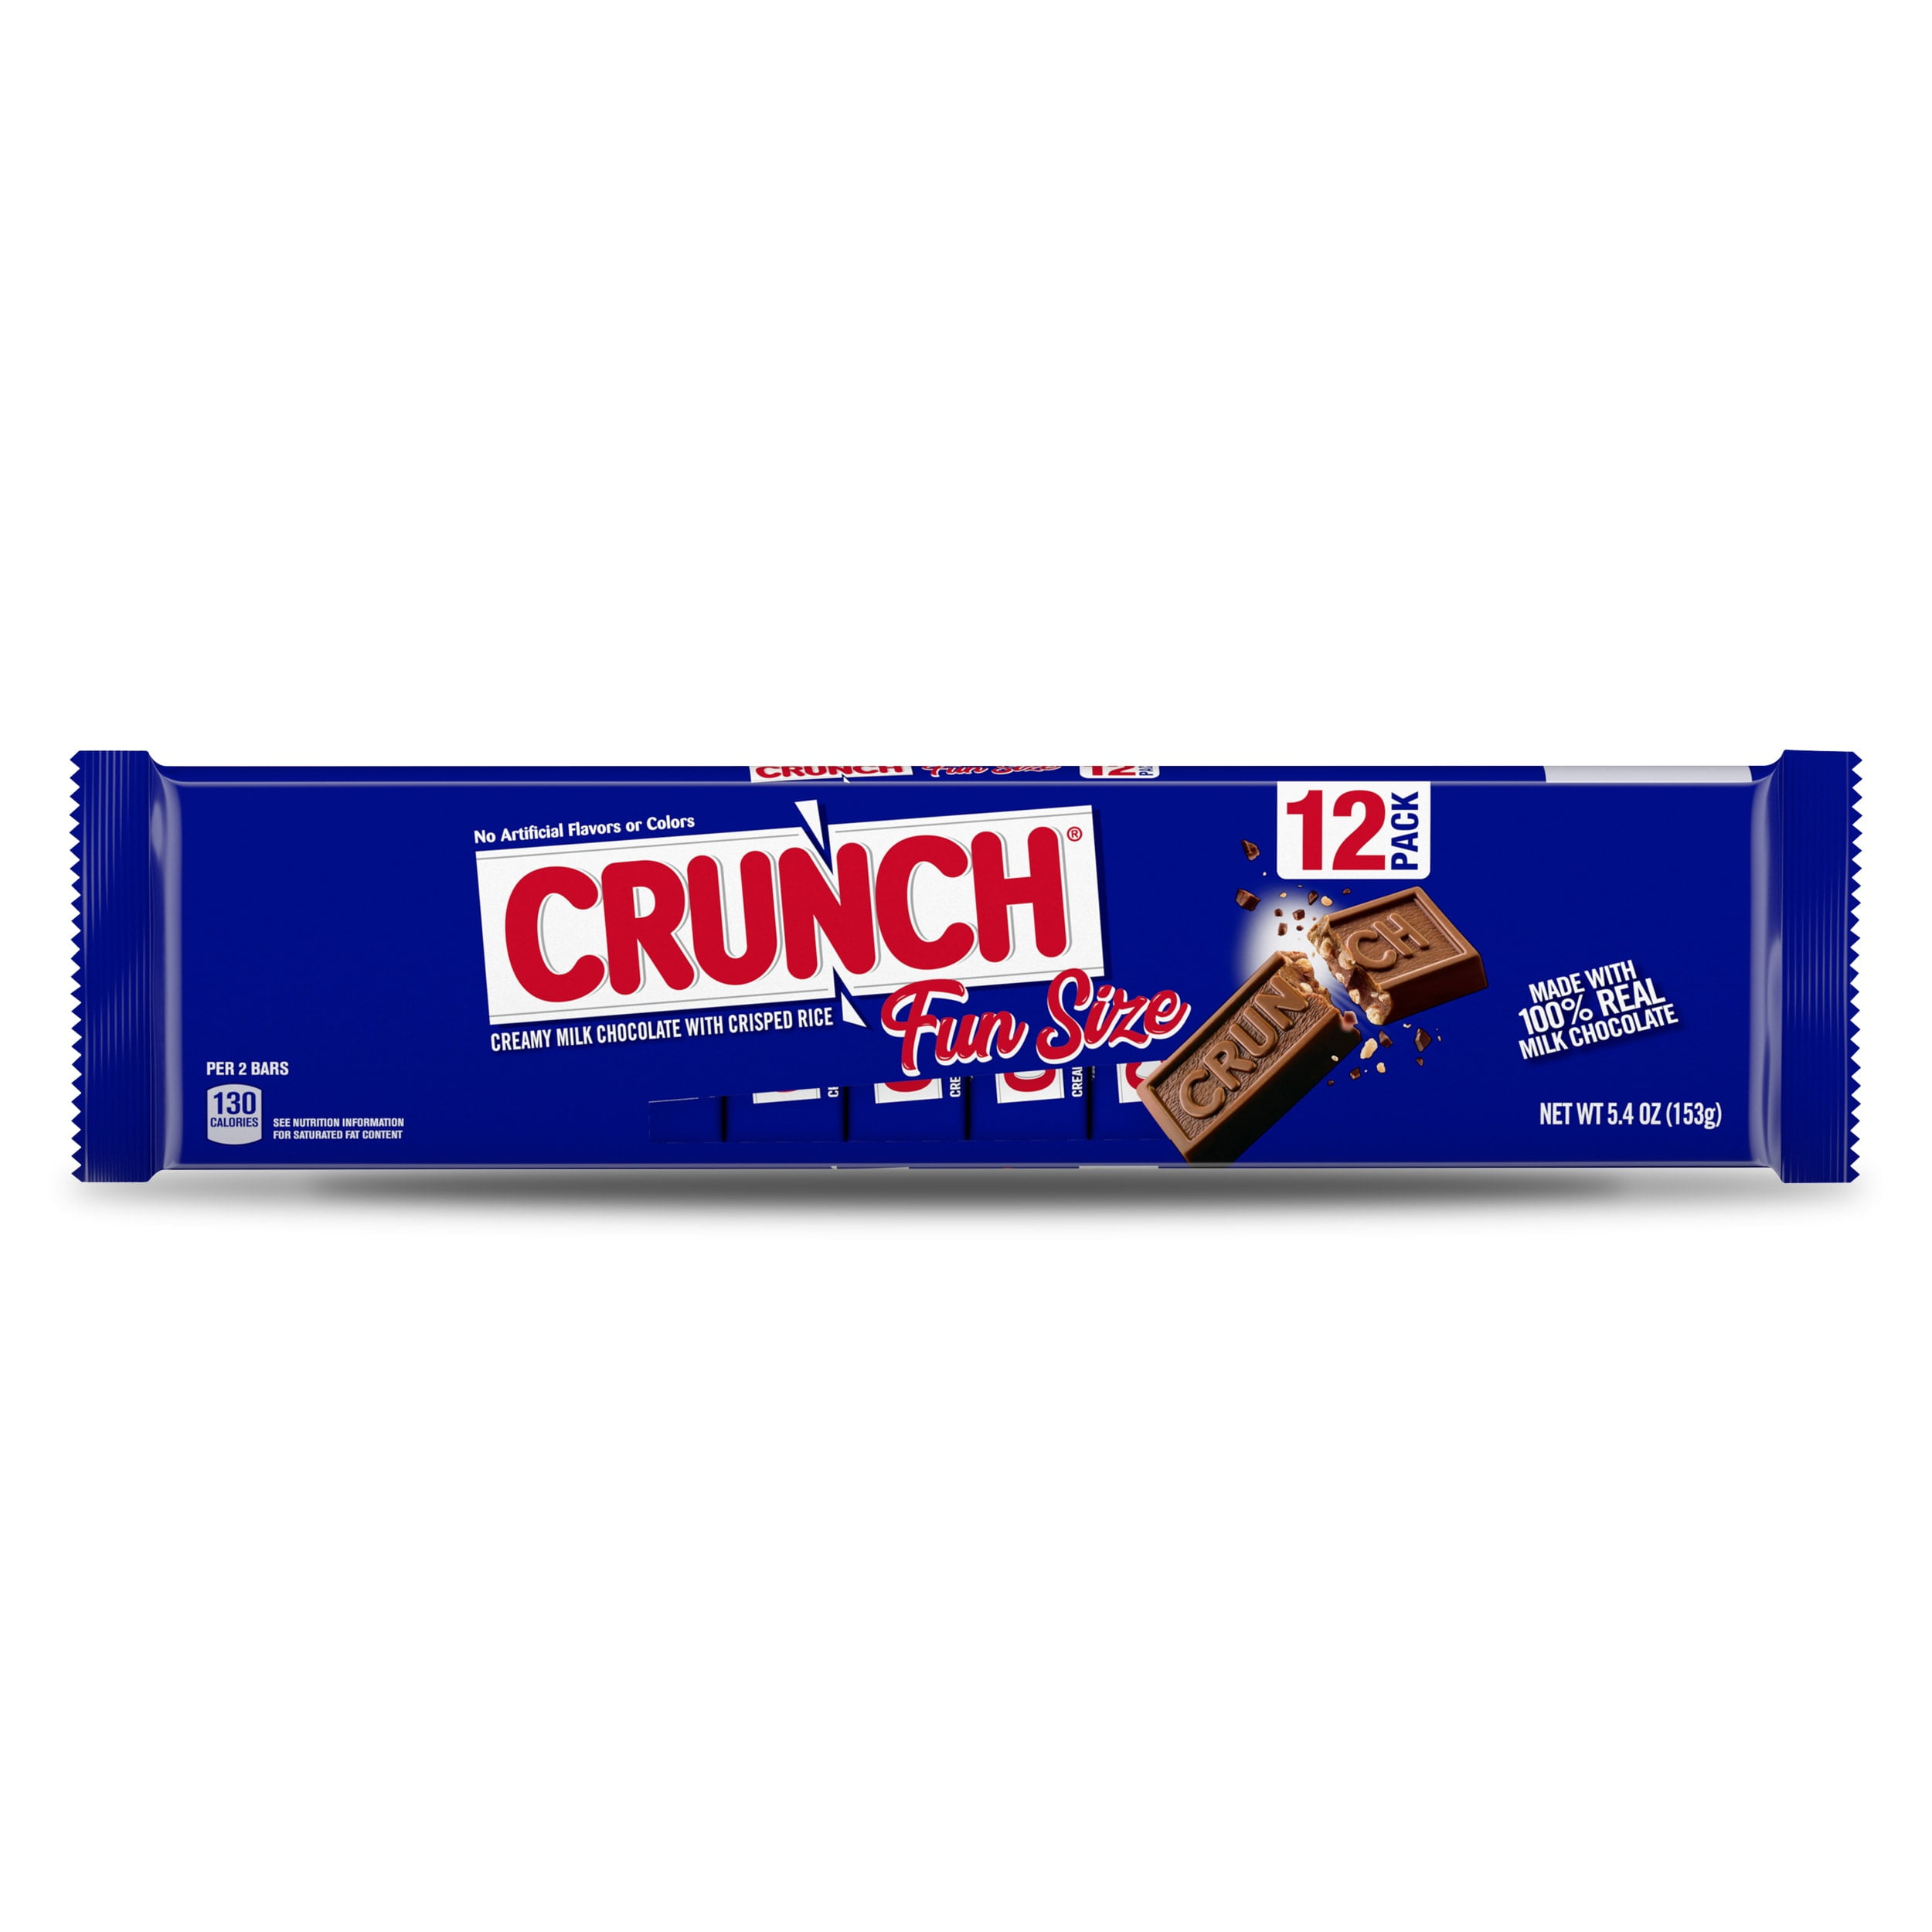 (12 Pack) CRUNCH Milk Chocolate and Crisped Rice, Fun Size Candy Bars, Easter Basket Stuffers, 5.4 oz